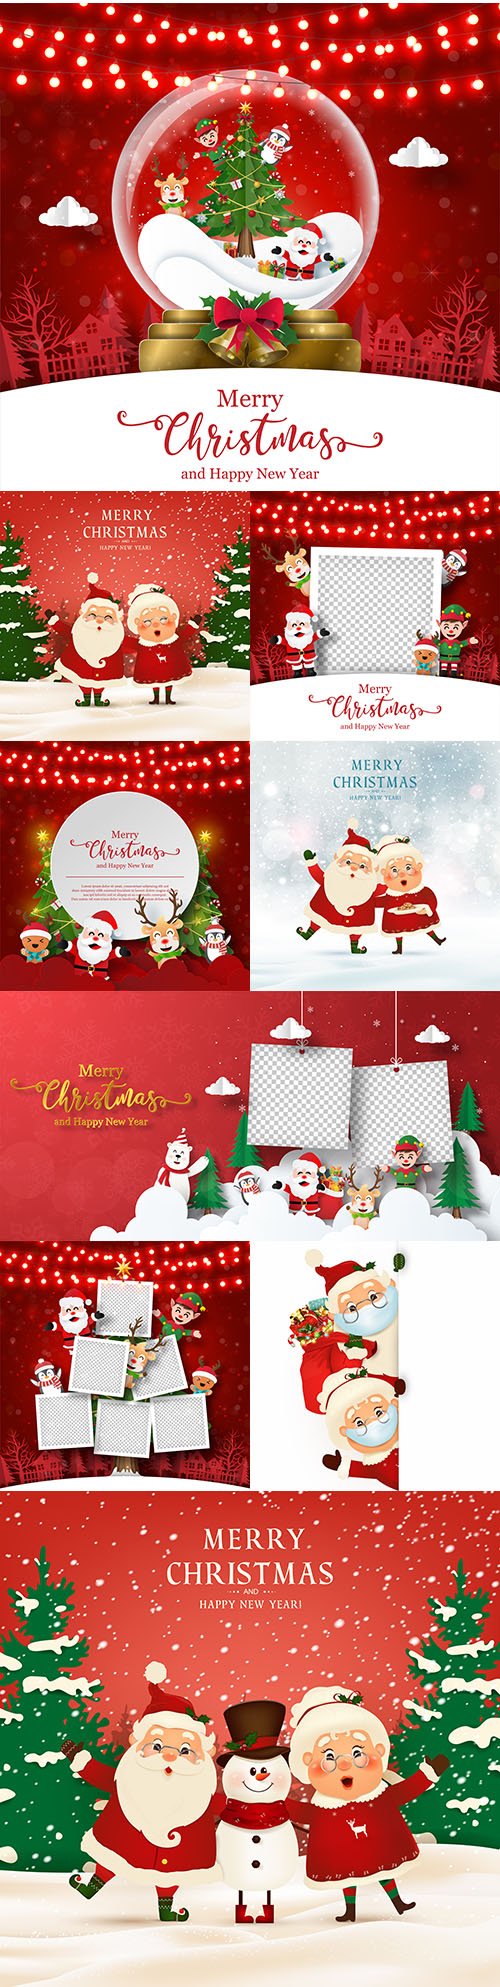 Christmas card of Santa Claus and friends thematic illustrations